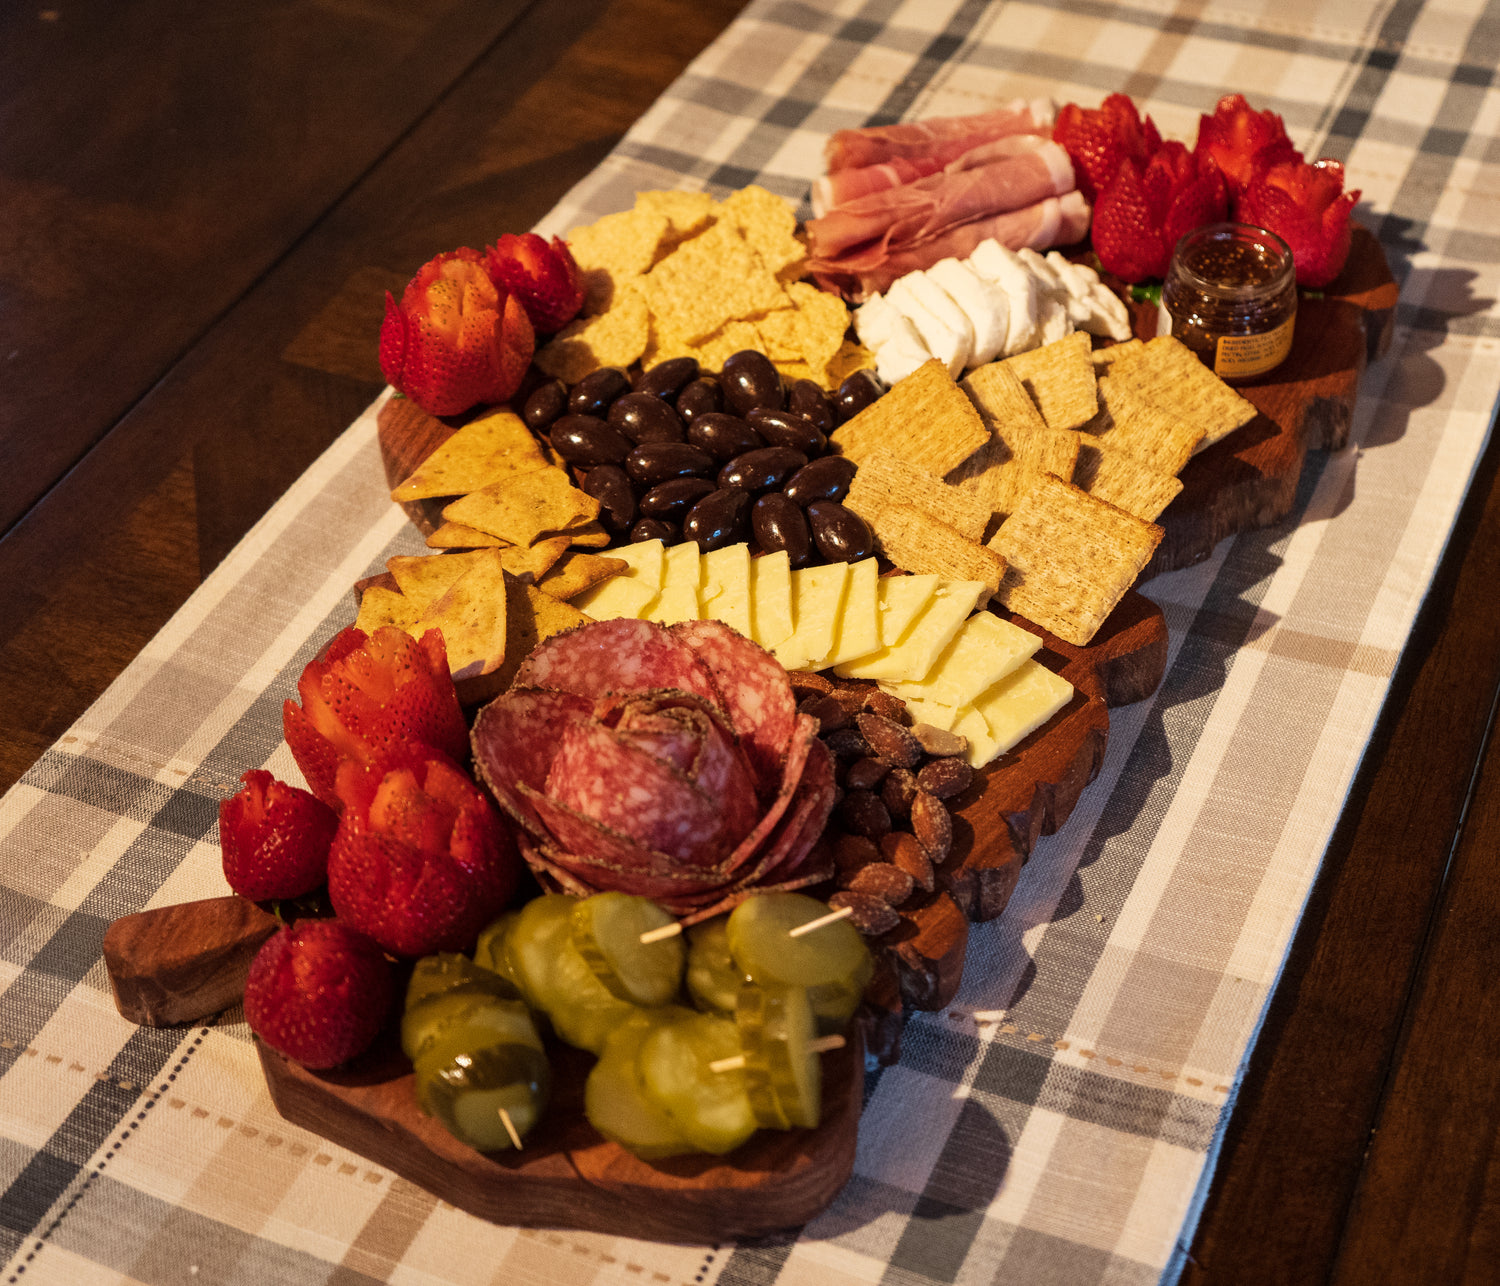 Lake Tahoe Shaped Charcuterie & Cheese Boards